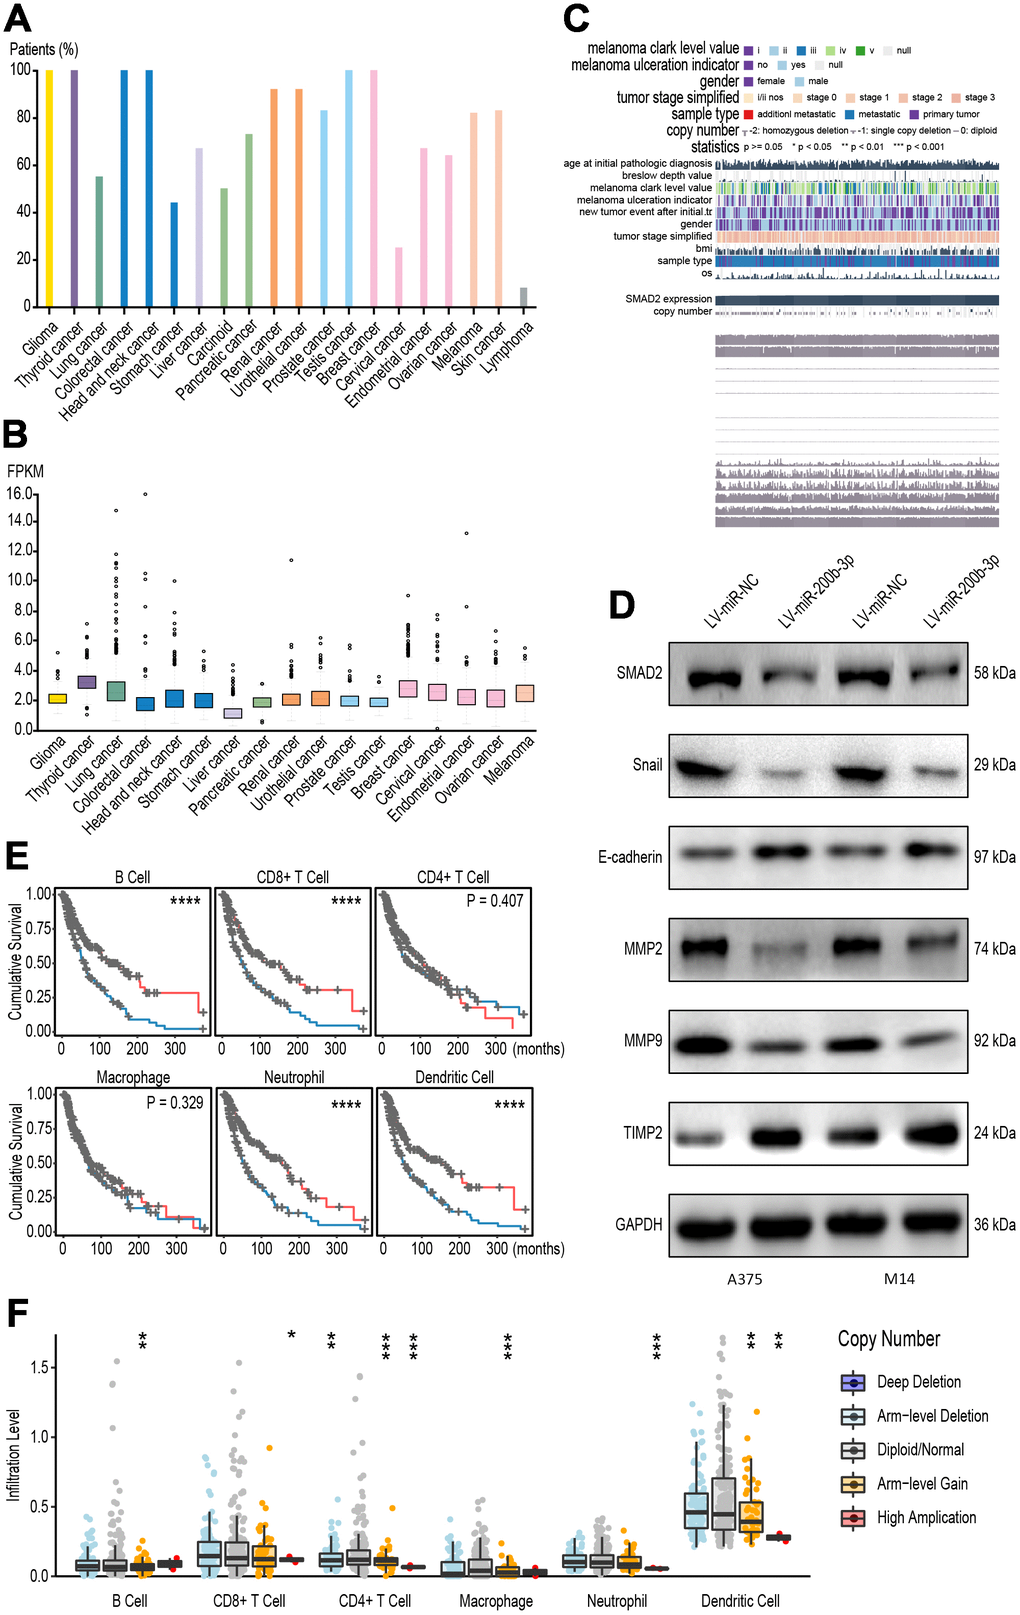 The NEAT1/miR-200b-3p/SMAD2 axis tended to promote melanoma by immune regulation. (A) Pan-cancer analysis was performed to test the positive rates of SMAD2 in several cancer tissues. (B) Pan-cancer analysis showed that SMAD2 was significantly increased In 17 types of cancer tissues. (C) Sequencing data and clinical characteristic was analyzed to show SMAD2 related with signaling pathways. (D) Western blot determined SMAD2-associated signaling proteins after transfection with LV-miR-200b-3p in A375 and M14 cells. (E) Kaplan-Meier plots was drawn to visualize the survival outcomes for different immune infiltrates according to a multivariable Cox proportional hazard model. (F) Immune infiltrates assays demonstrated SMAD2-related immune cells after melanoma patients were classified according to SMAD2 levels.